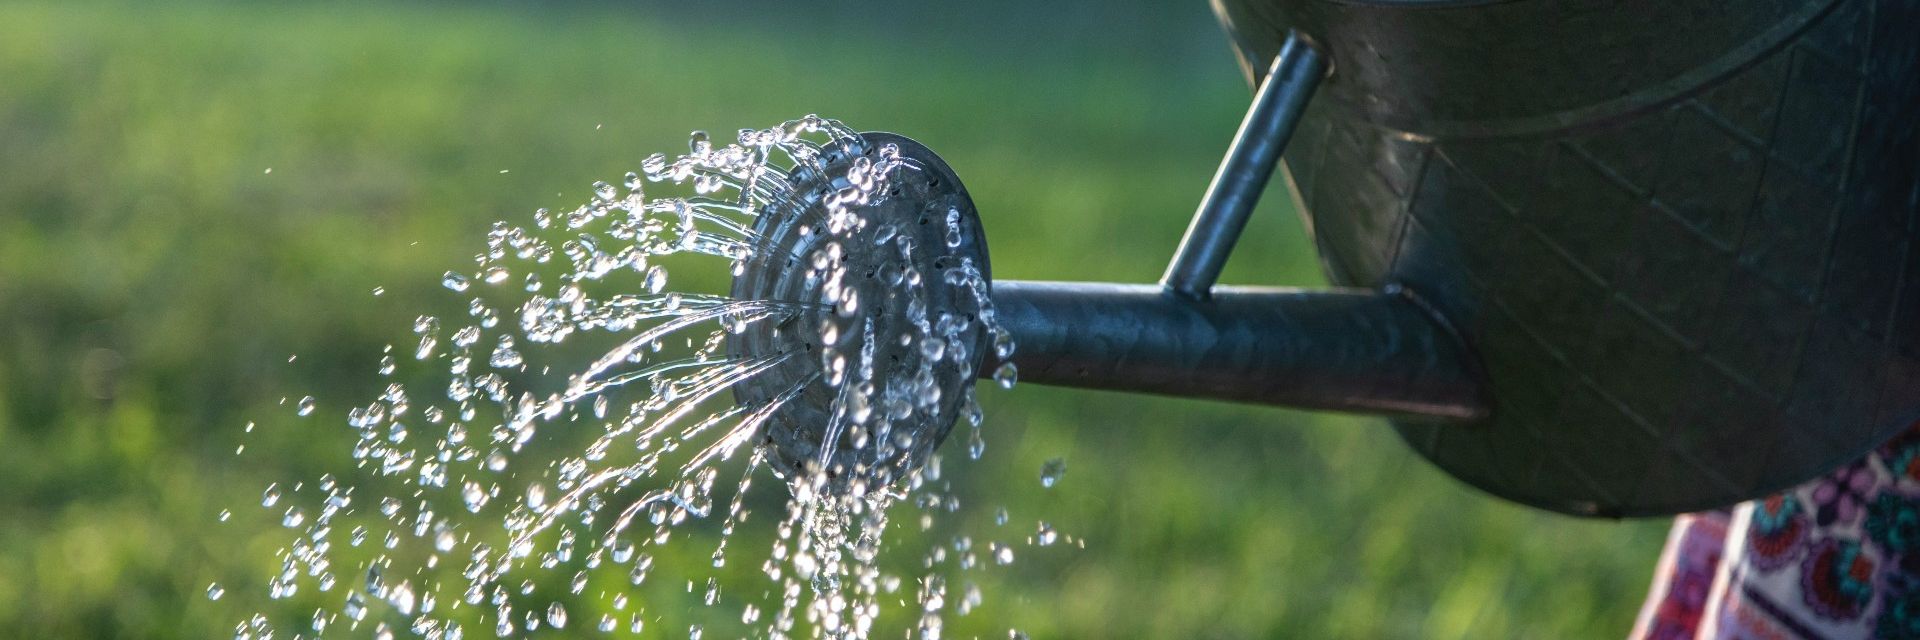 Close up of a watering can with water coming out of it